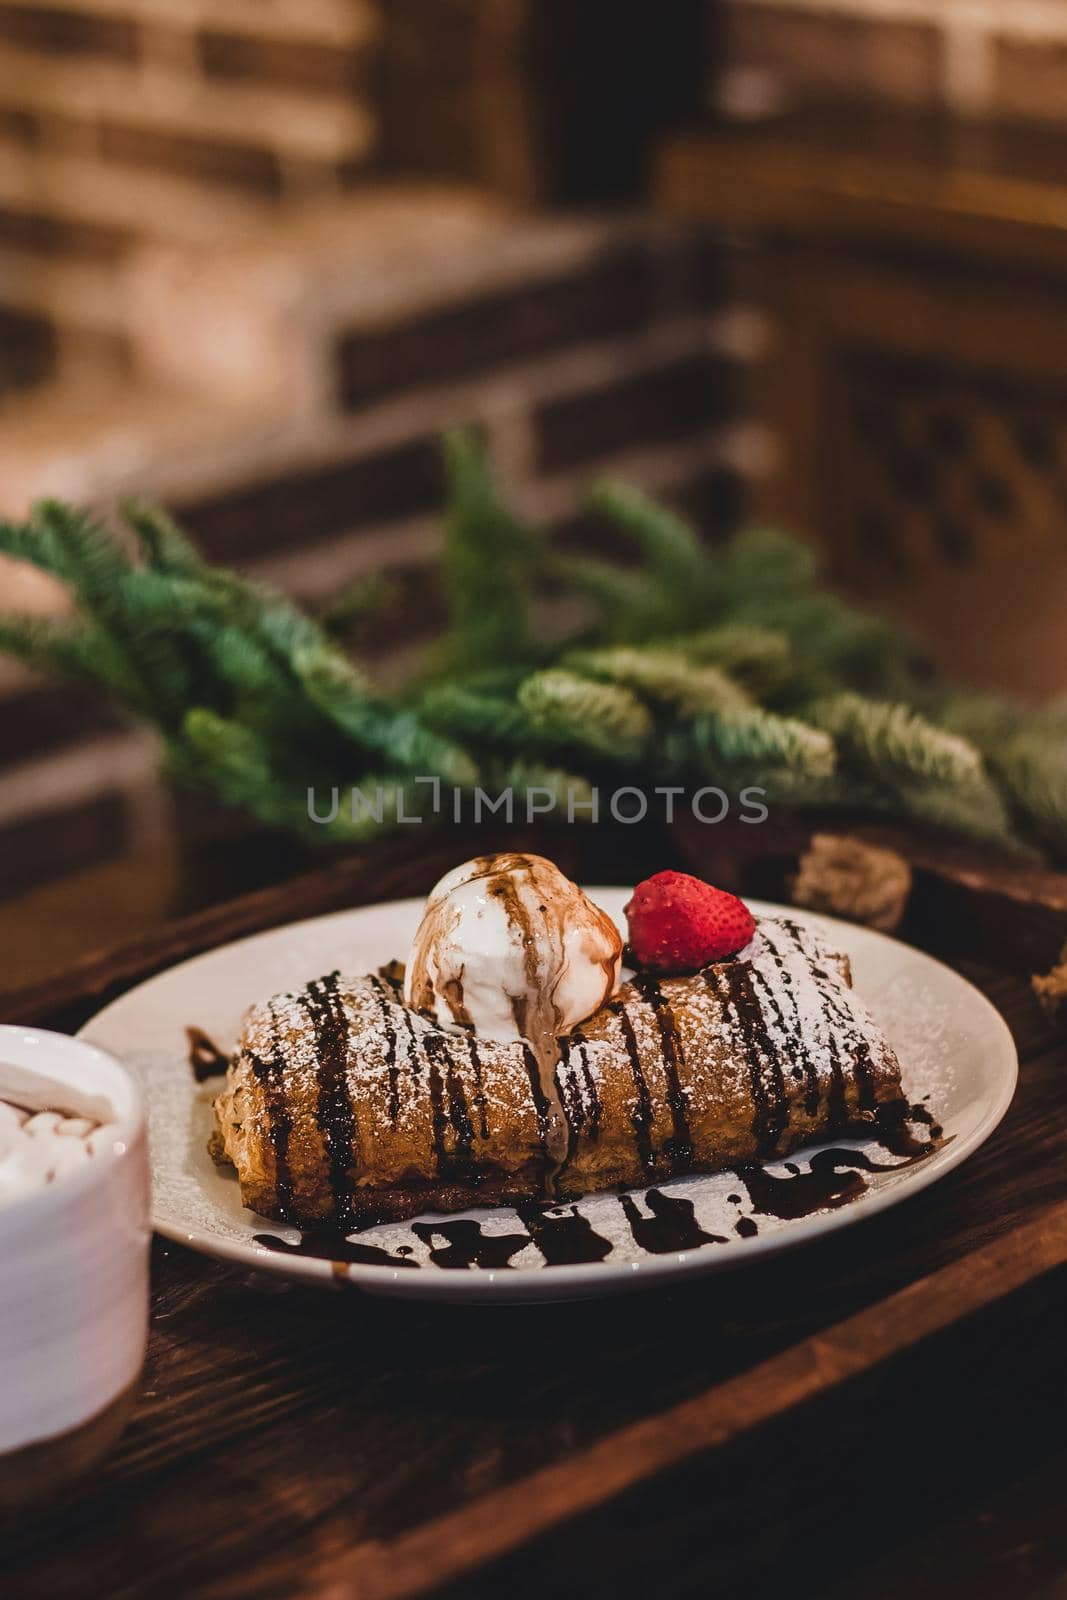 Closeup of a strudel with a strawberry on a Christmas plate near bamboo branch. Christmas breakfast on a wooden table